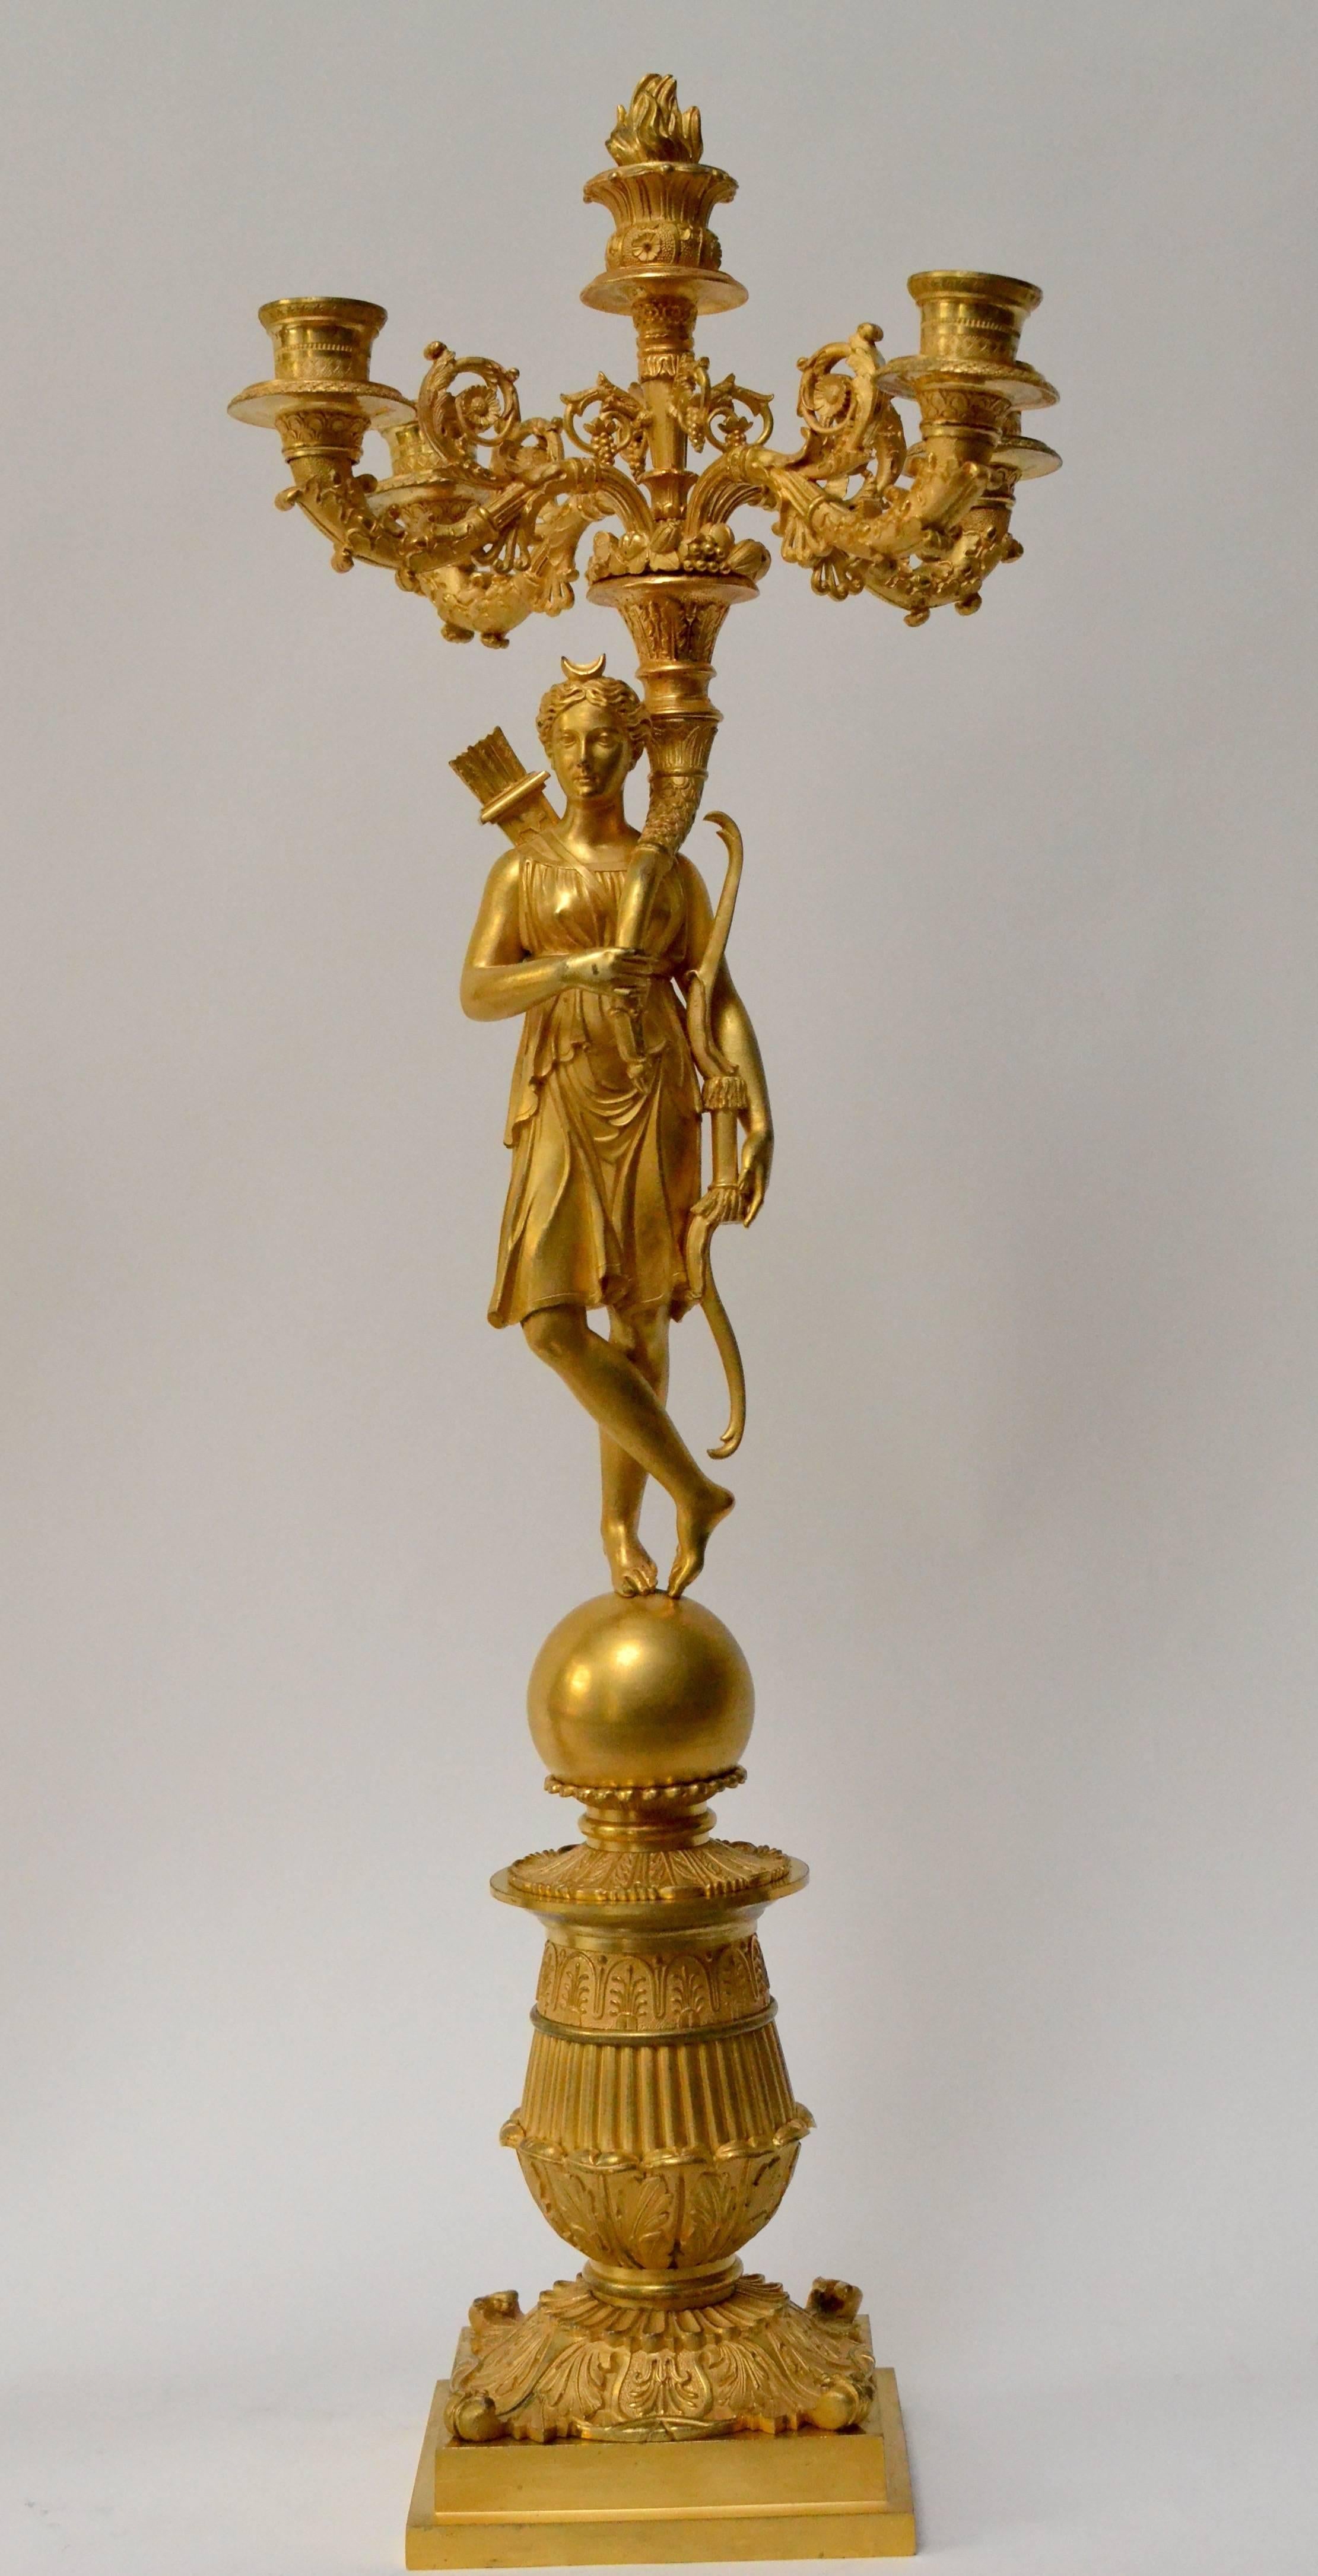 Pair of French gilt bronze and patinated Empire candelabra, circa 1825. The figures holding the candle branches are of Diana and Apollo.